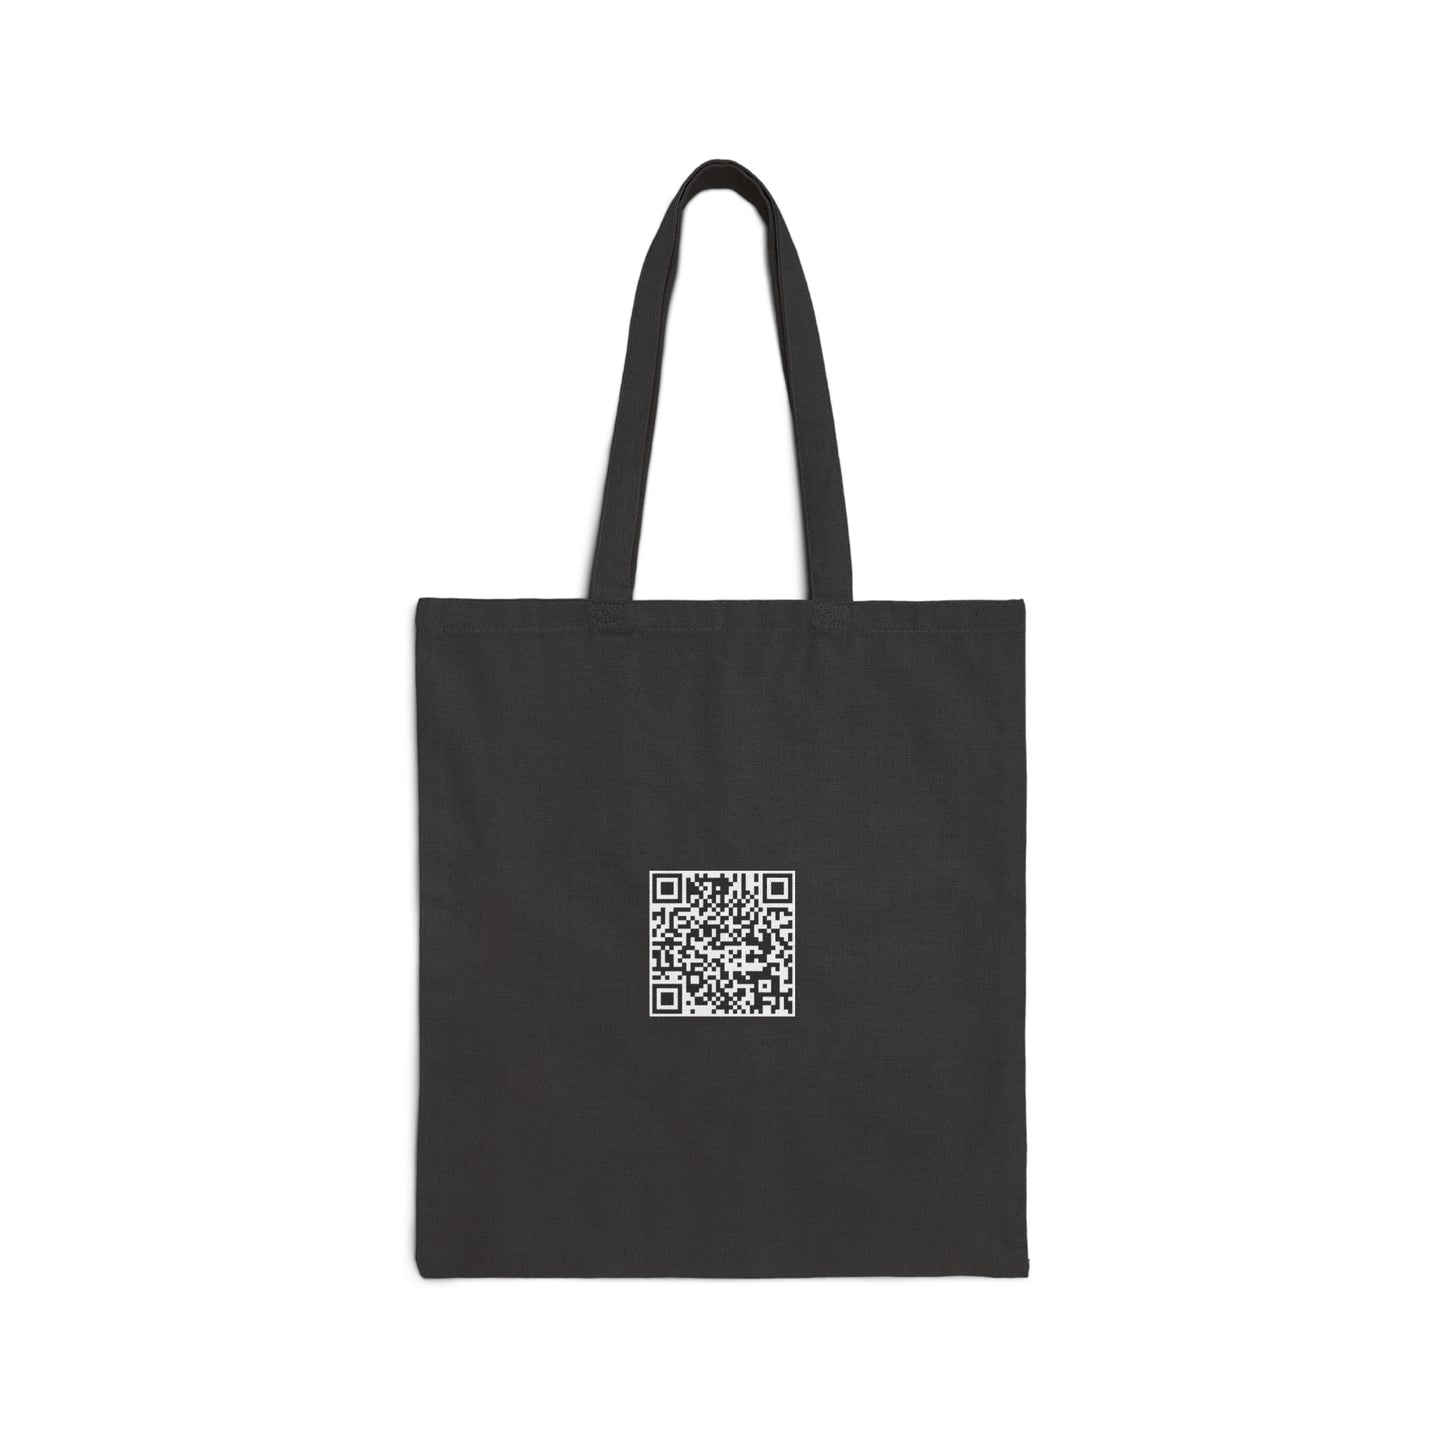 Only In Darkness - Cotton Canvas Tote Bag